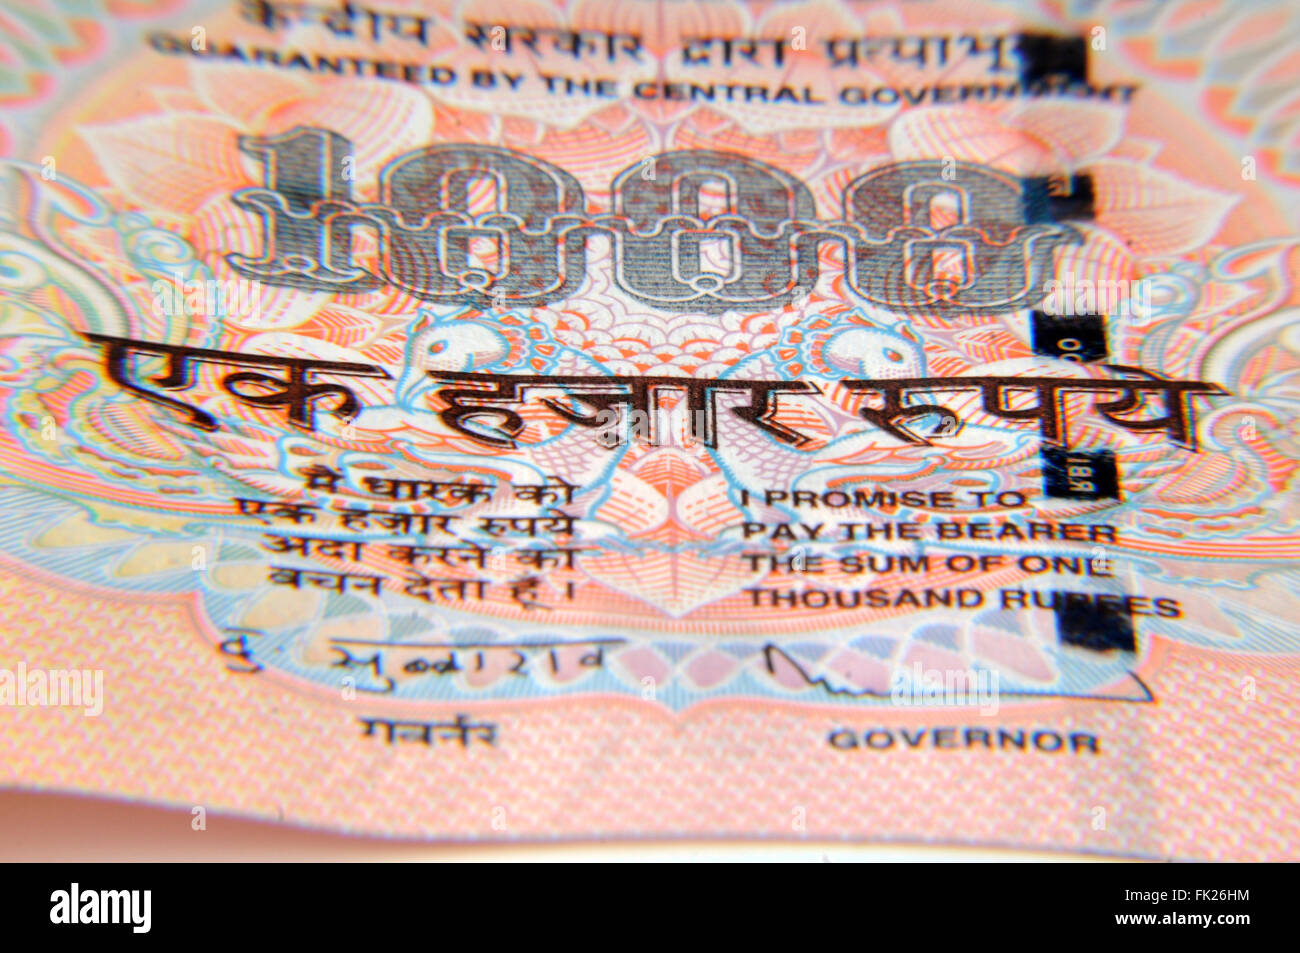 A one thousand rupee note closeup (Indian Currency) Stock Photo